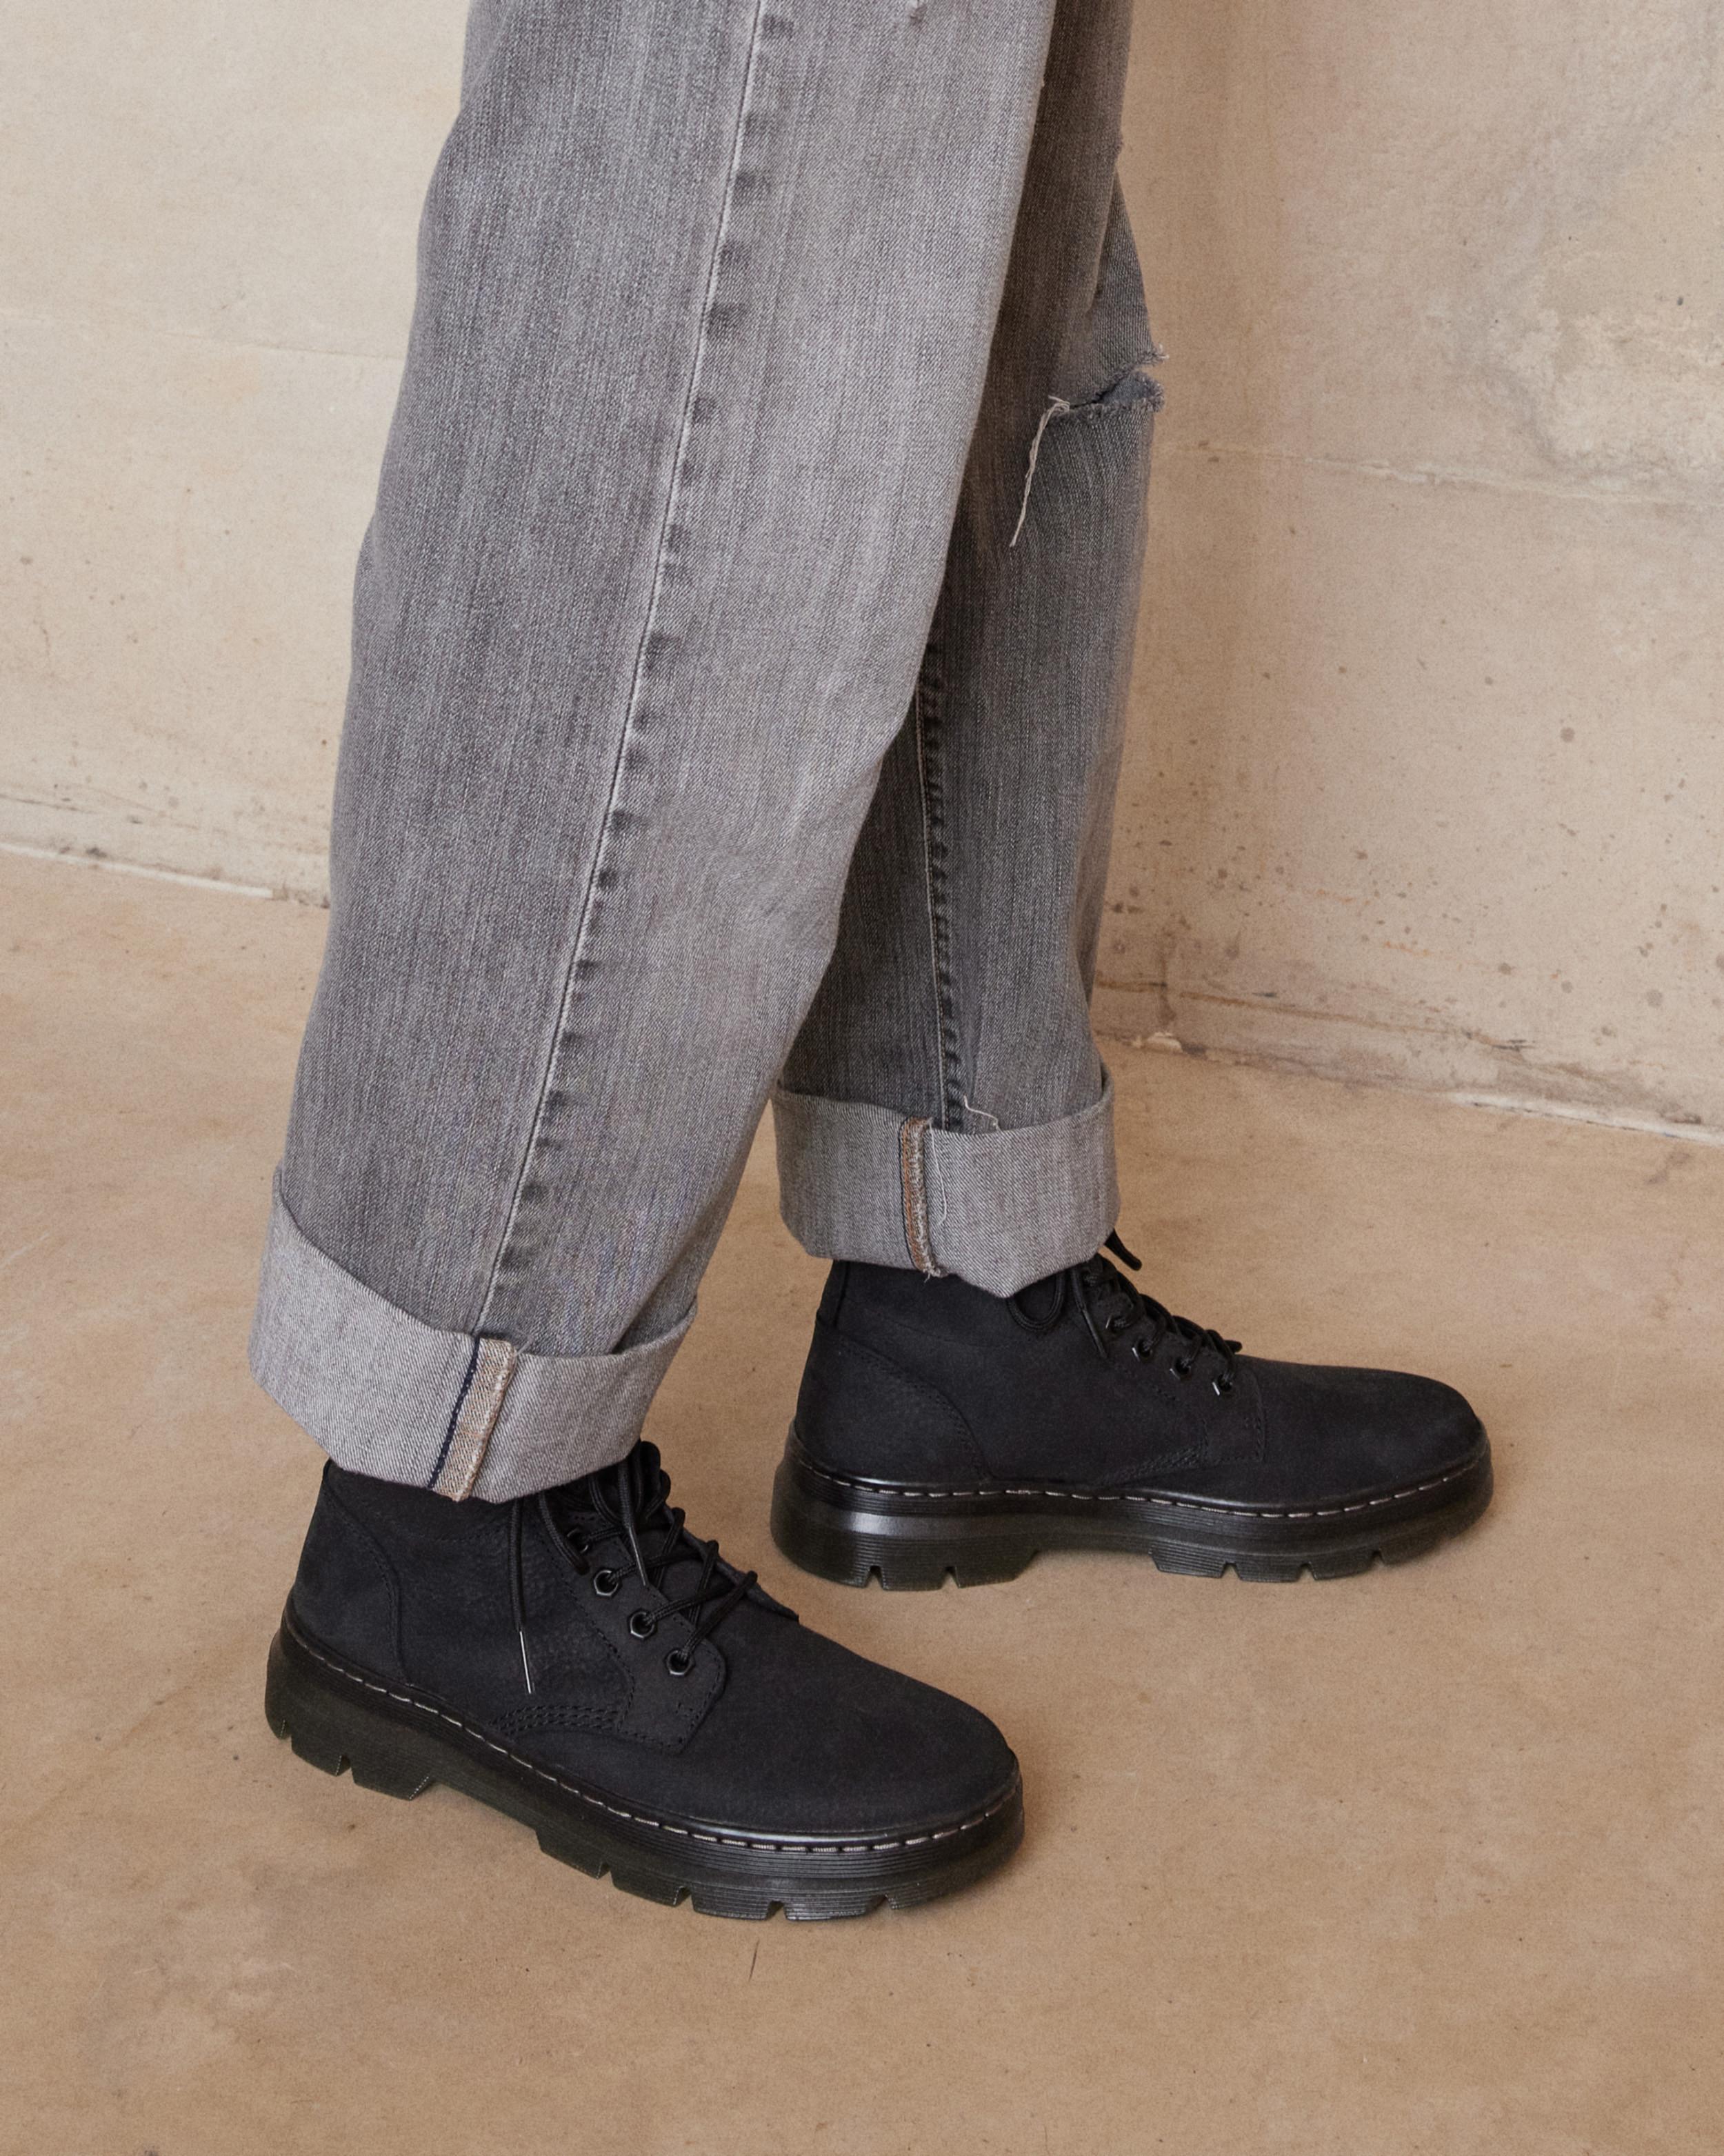 Stivali utility Combs Tech in pelle Milled NabukStivali utility Combs Tech in pelle Milled Nabuk Dr. Martens